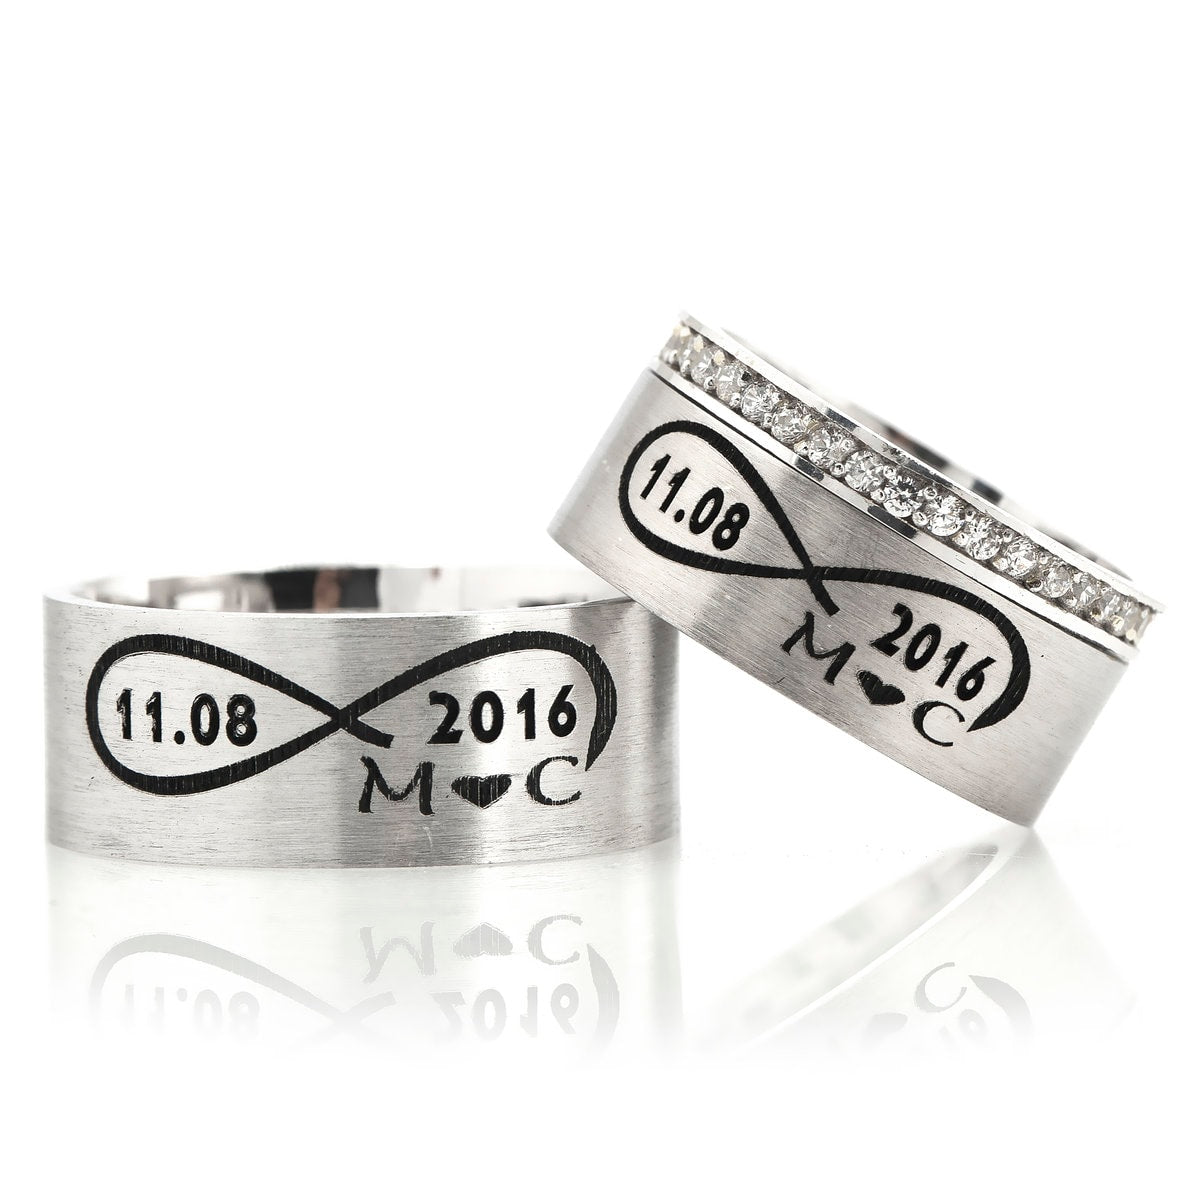 silver wedding ring with Ä±nfinite and heart motive orlasilver